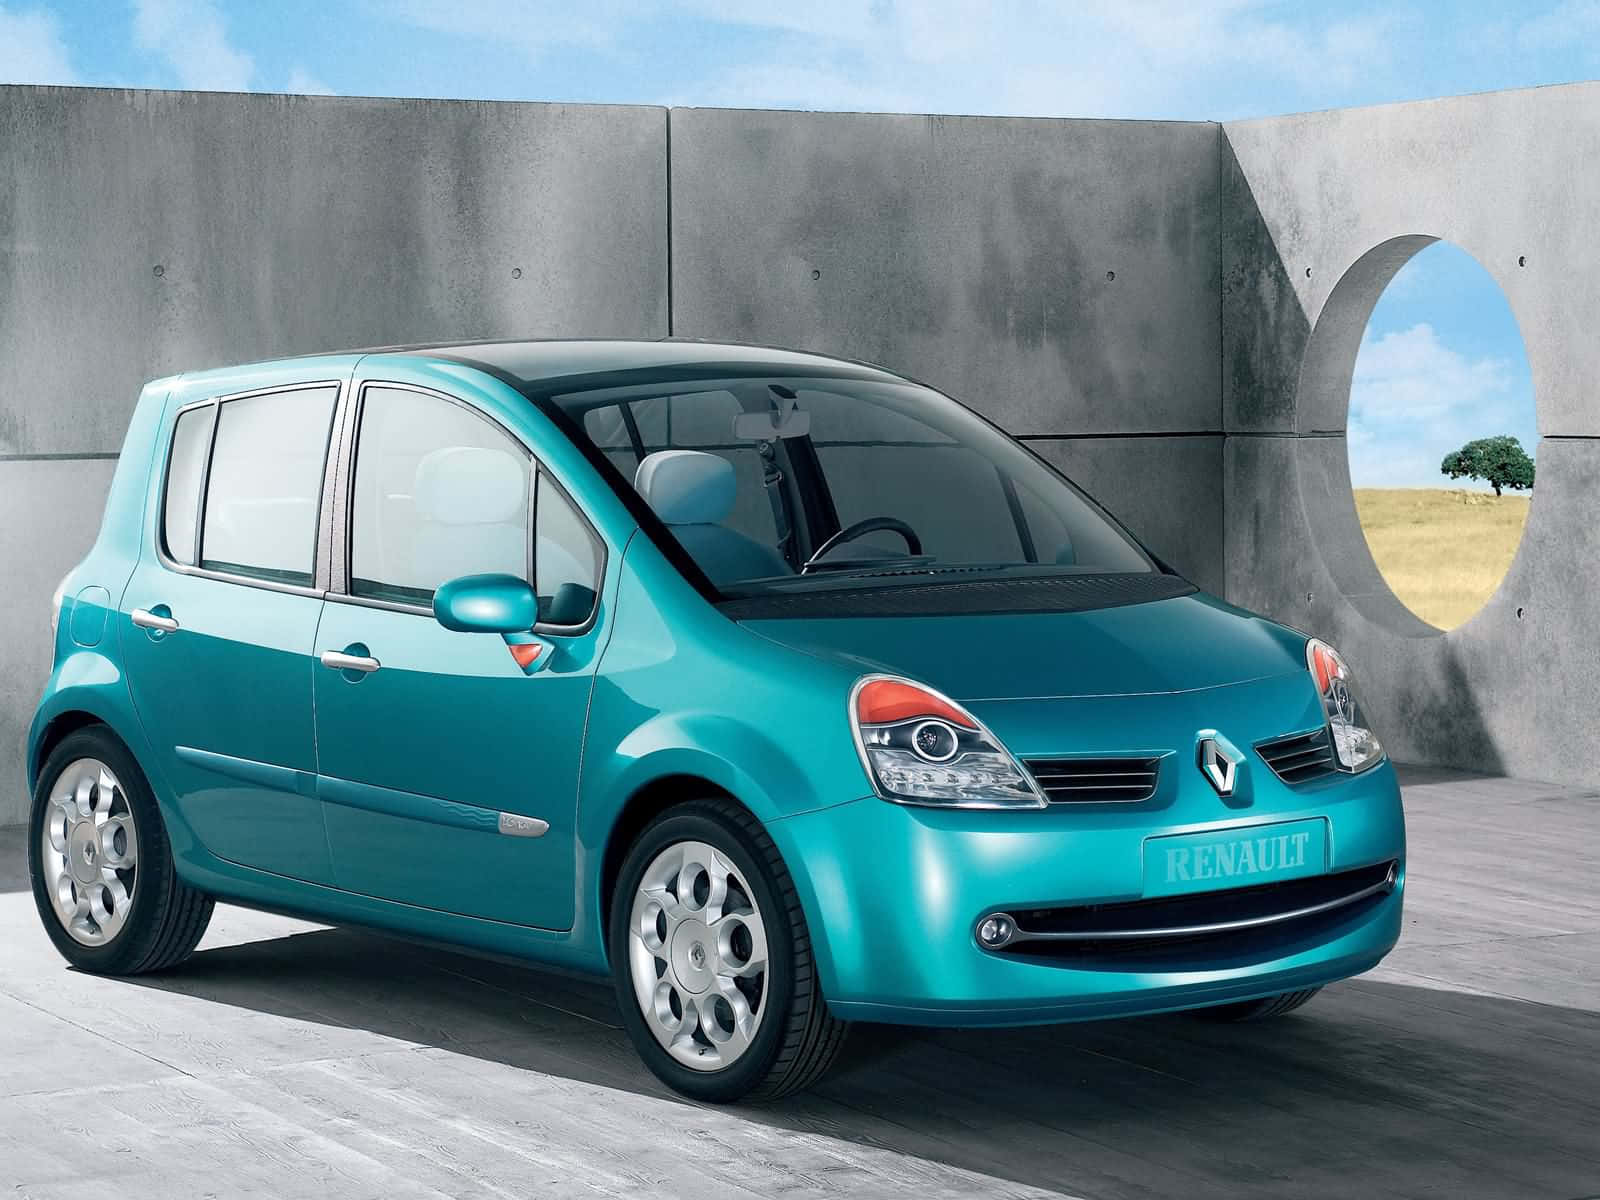 The Stylish and Efficient Renault Modus Wallpaper